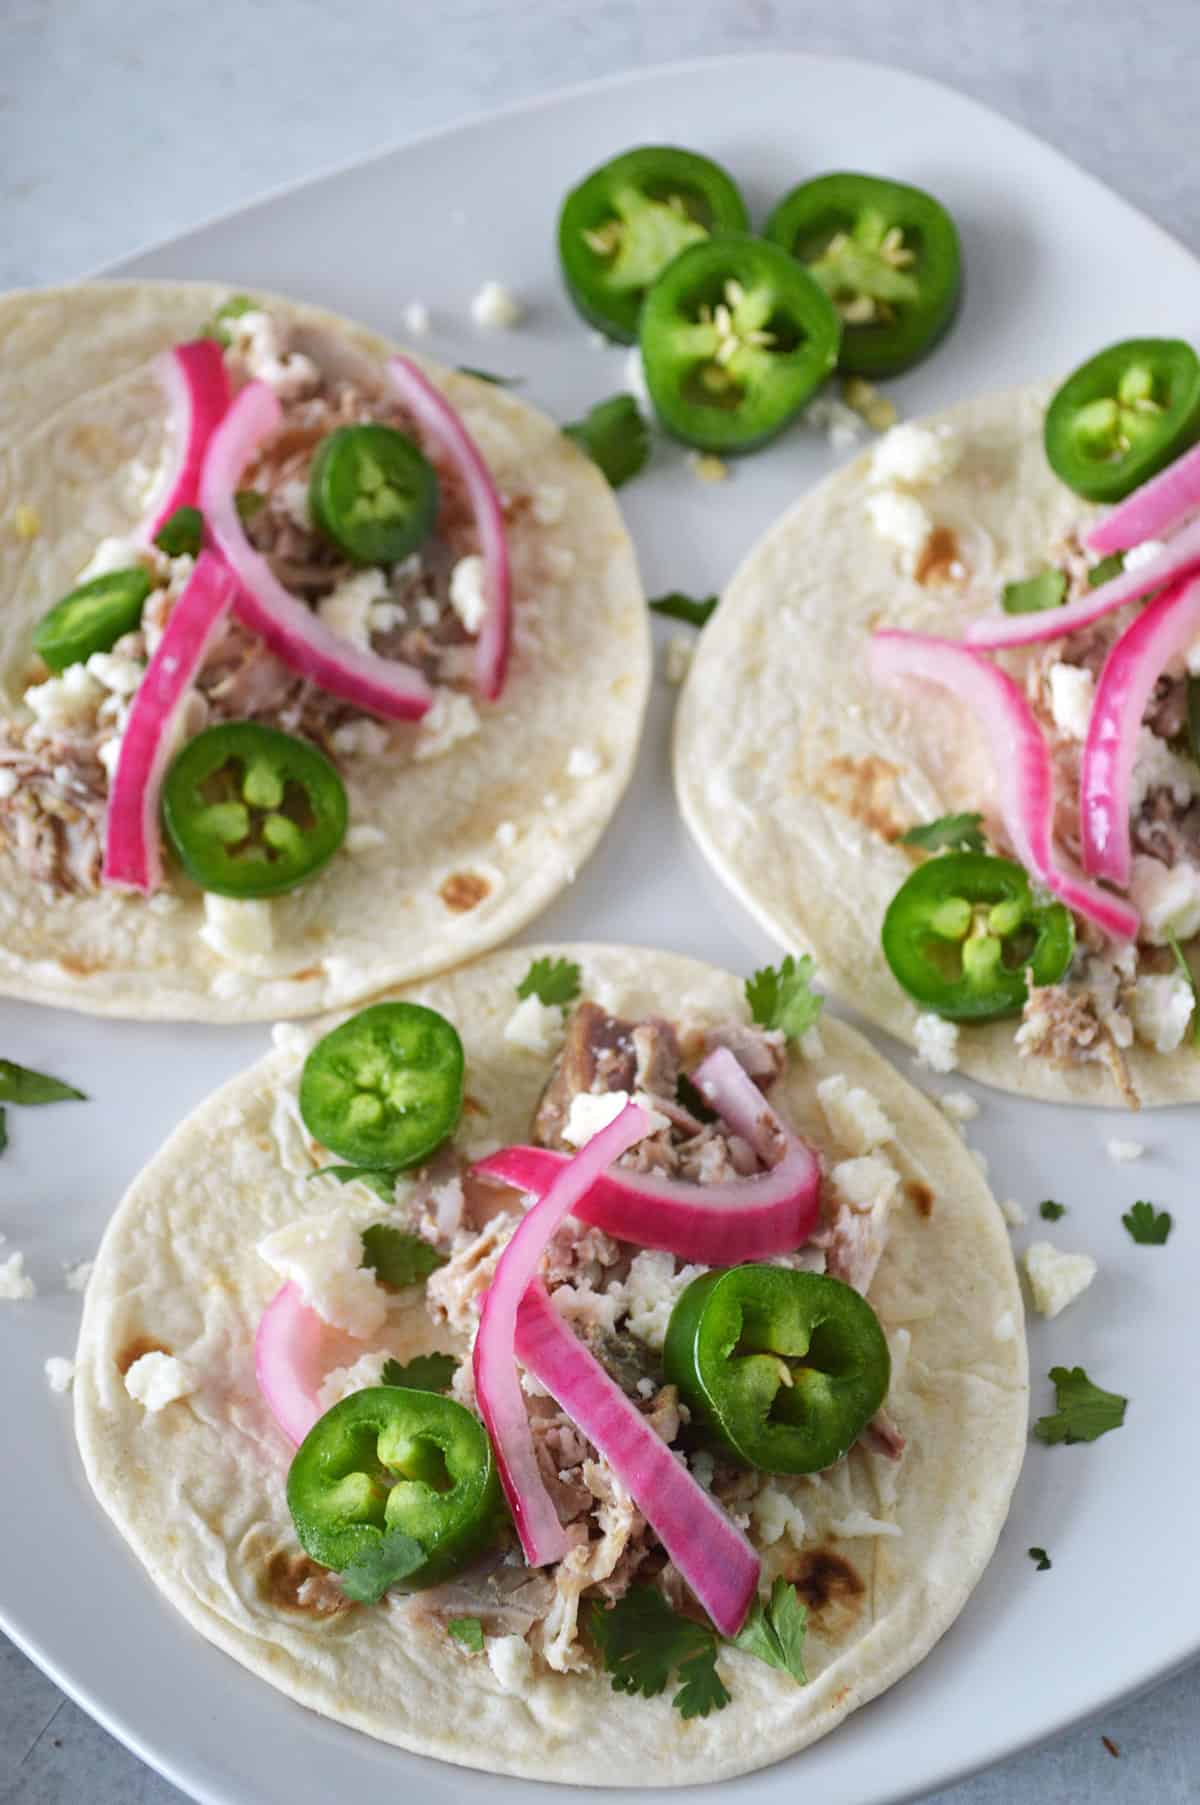 Tacos topped with pickled red onions, jalapenos, shredded pork, cilantro and cheese.